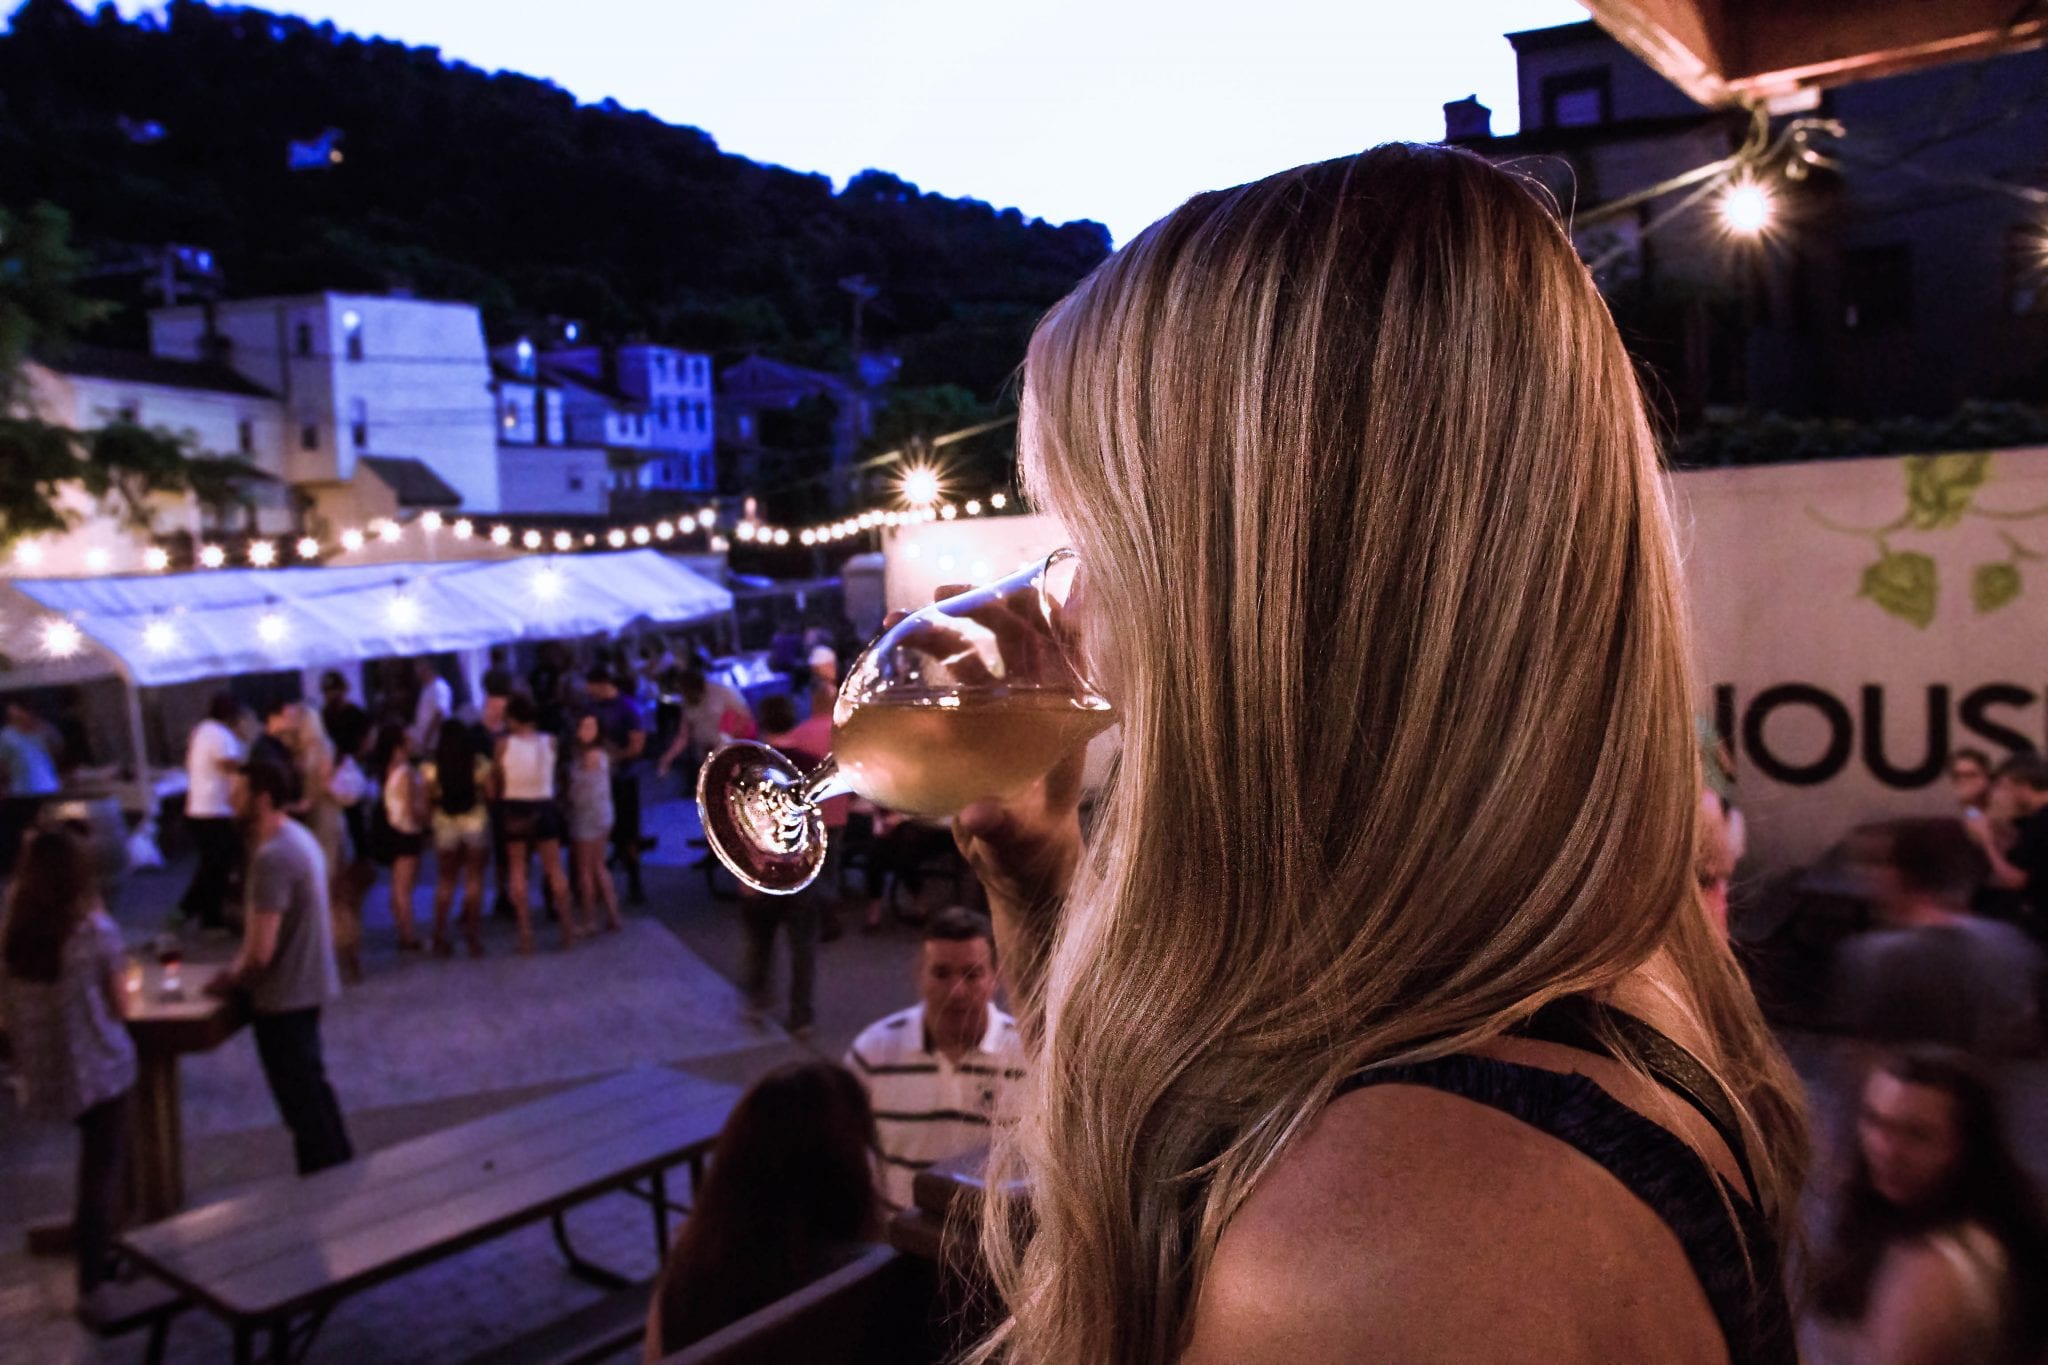 A woman enjoys a pint of beer in Grist House's biergarden in Pittsburgh, PA